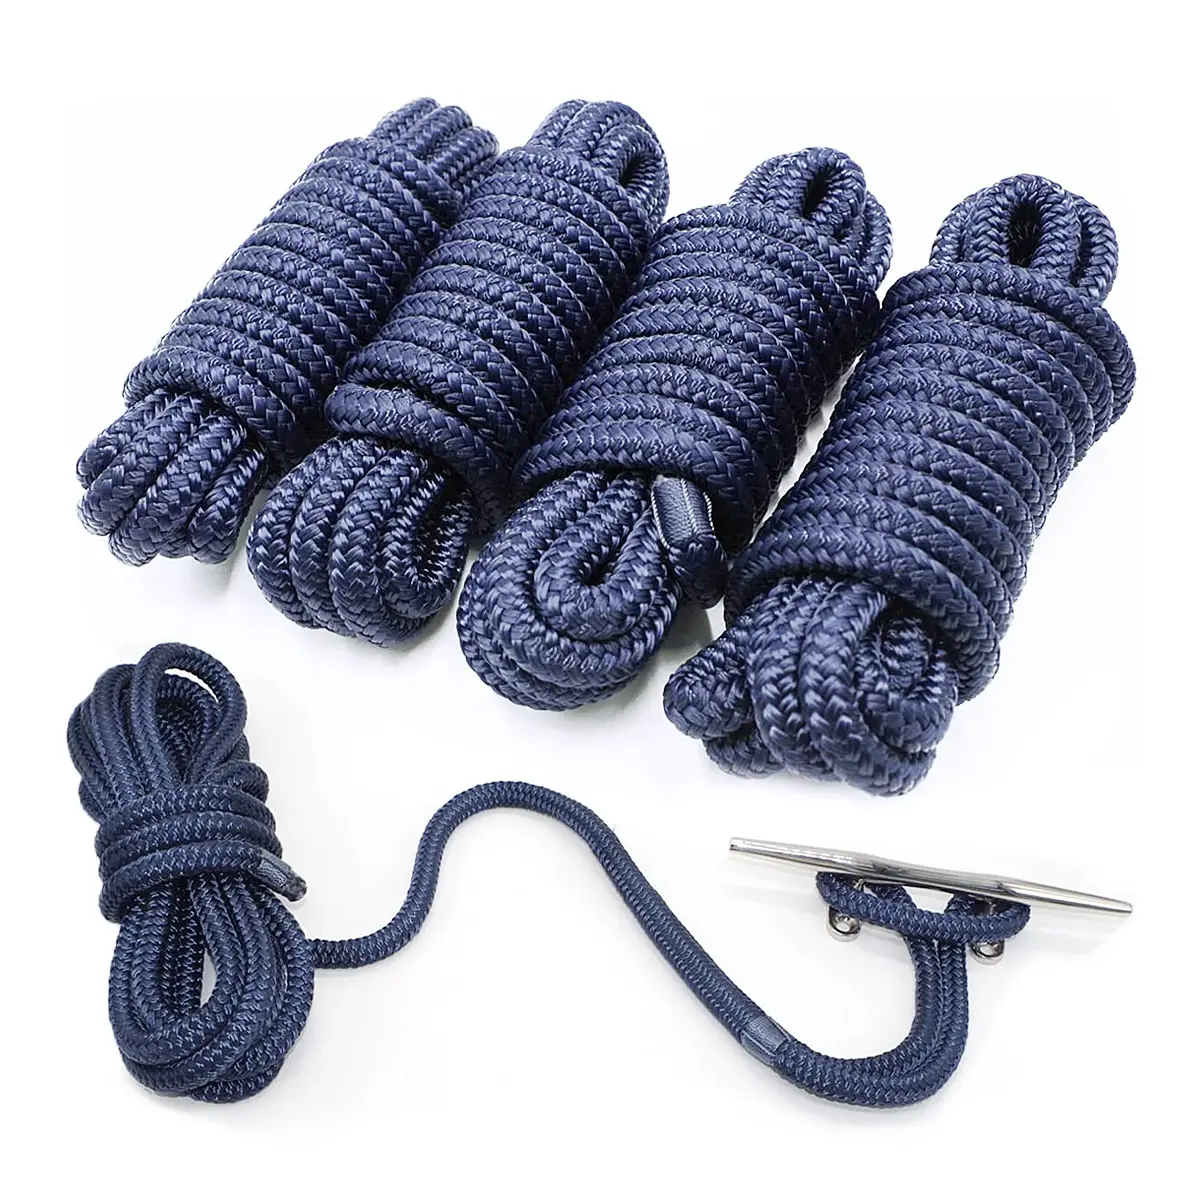 Dock Line 15 ft other marine supplies Yacht boat mooring Nylon Double Braided dock line Rope